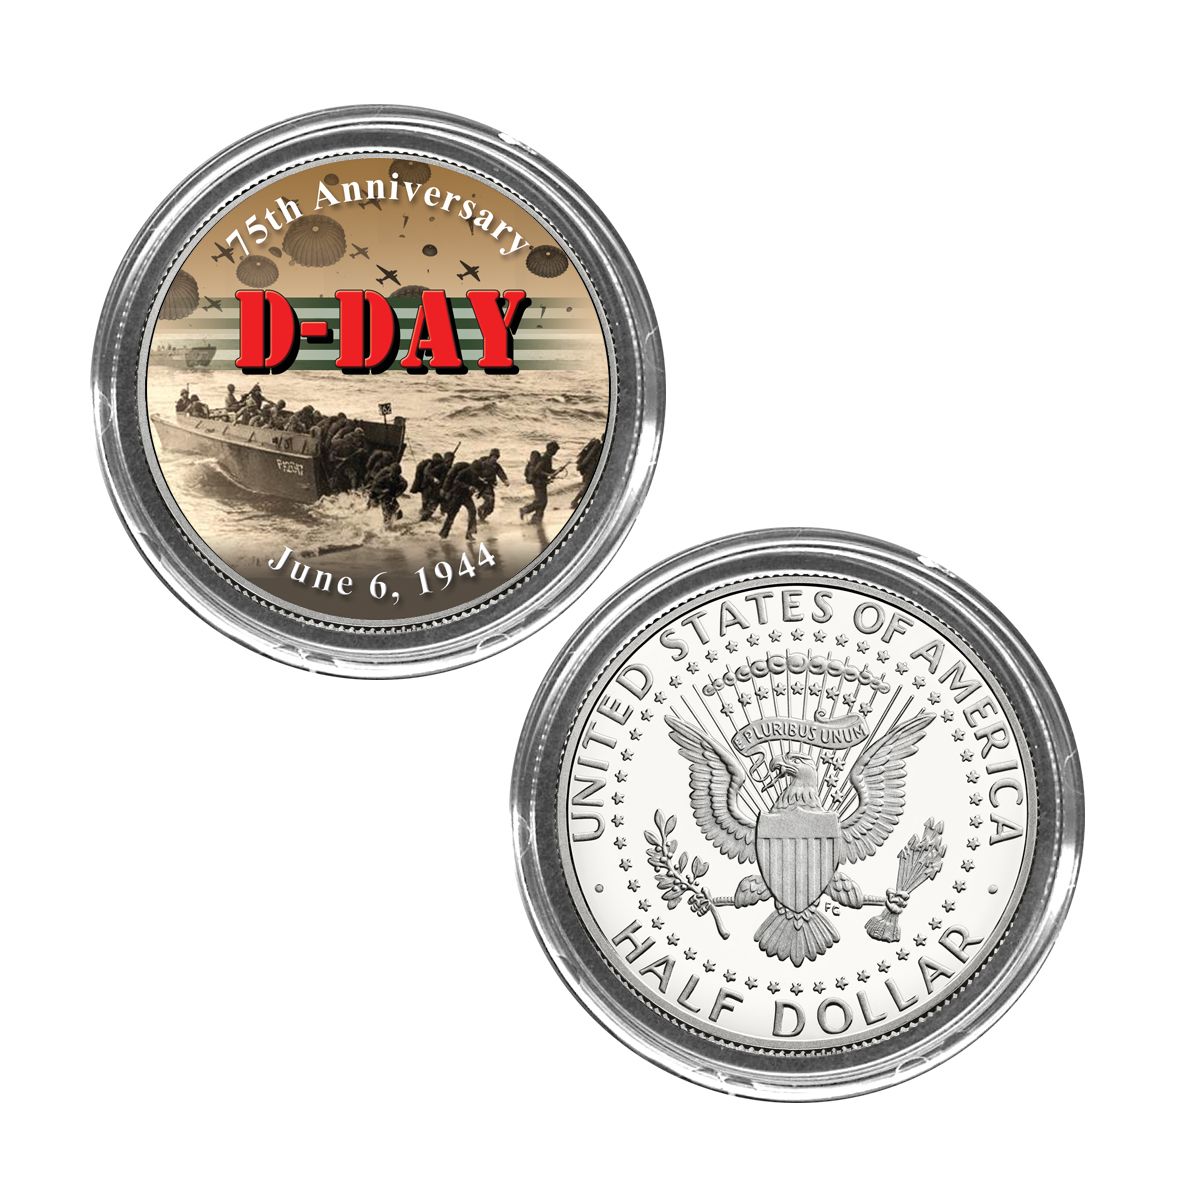 1 Regular 2019 D-Day Juno Beach 75th Anniversary Normandy $2 coins 1 Colored 